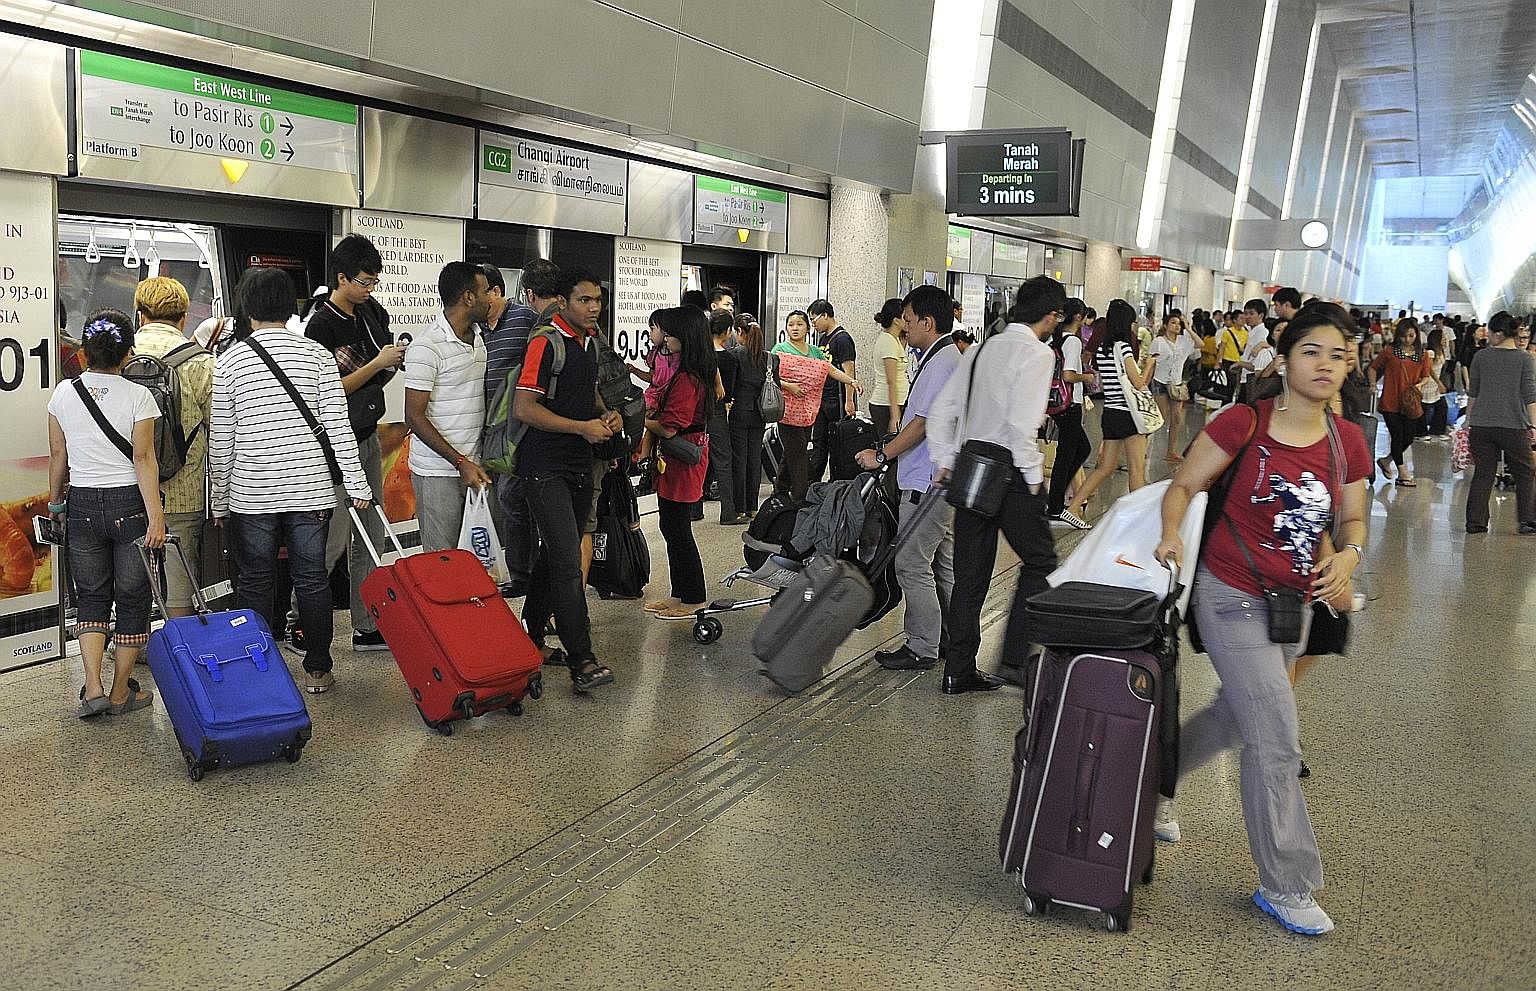 Commuters at the Changi Airport MRT station. A direct MRT link to Changi Airport would be more convenient for travellers, who currently have to transfer to a shuttle train at Tanah Merah MRT station.